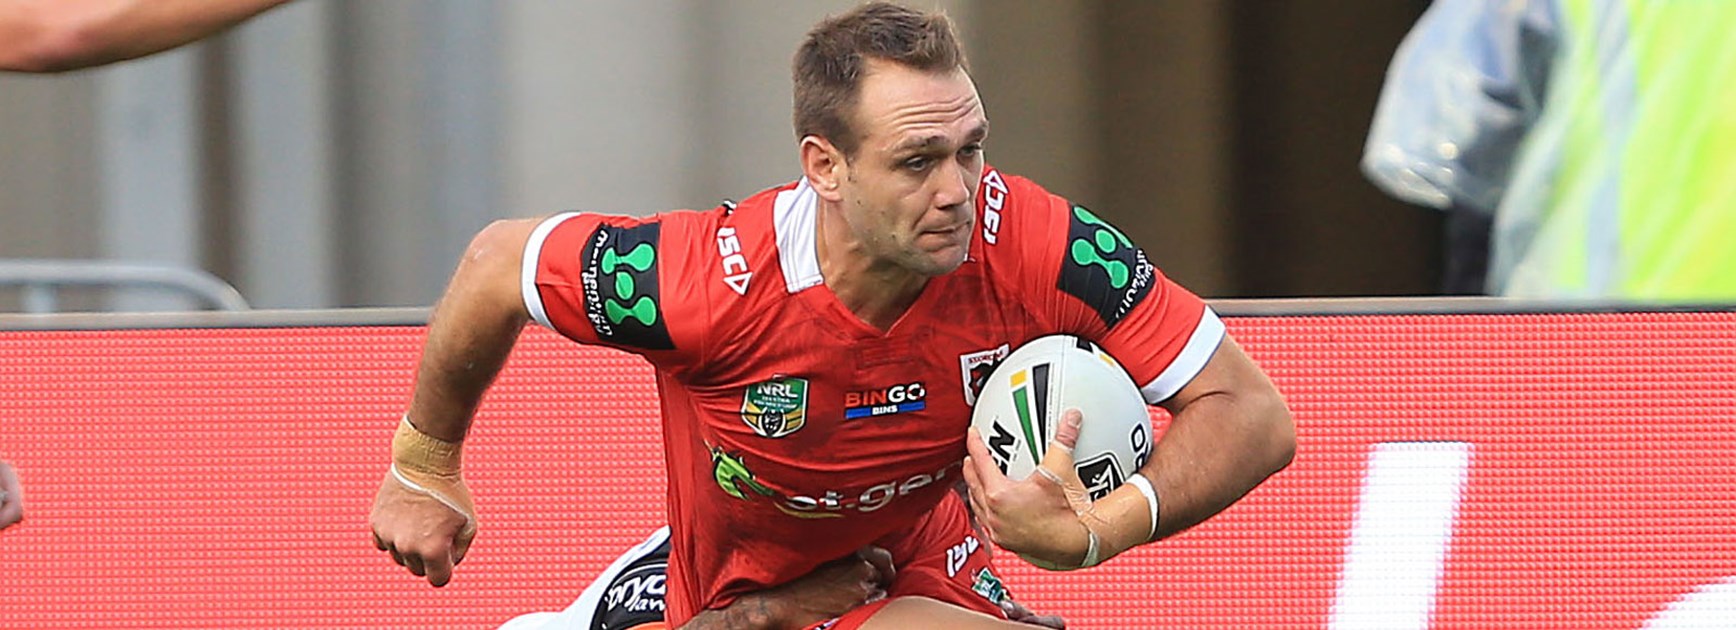 Dragons winger Jason Nightingale crossed for three tries in the first half of his side's clash with Wests Tigers.